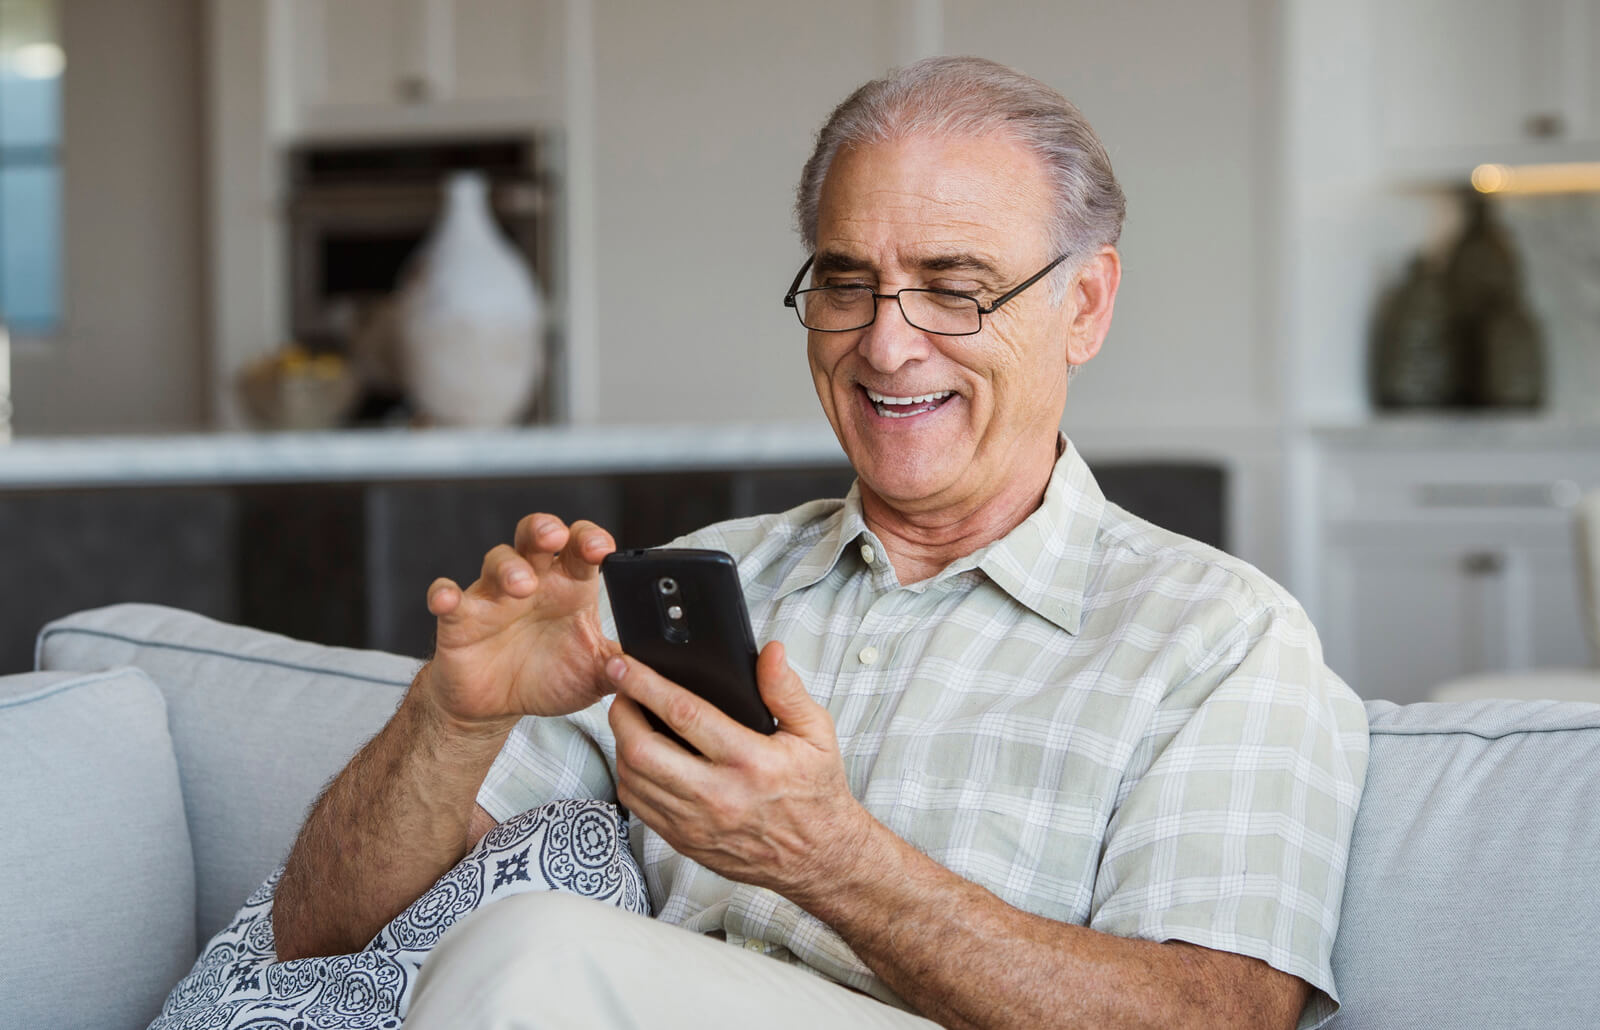 How to Effectively Charge Mobile Phones for Seniors?